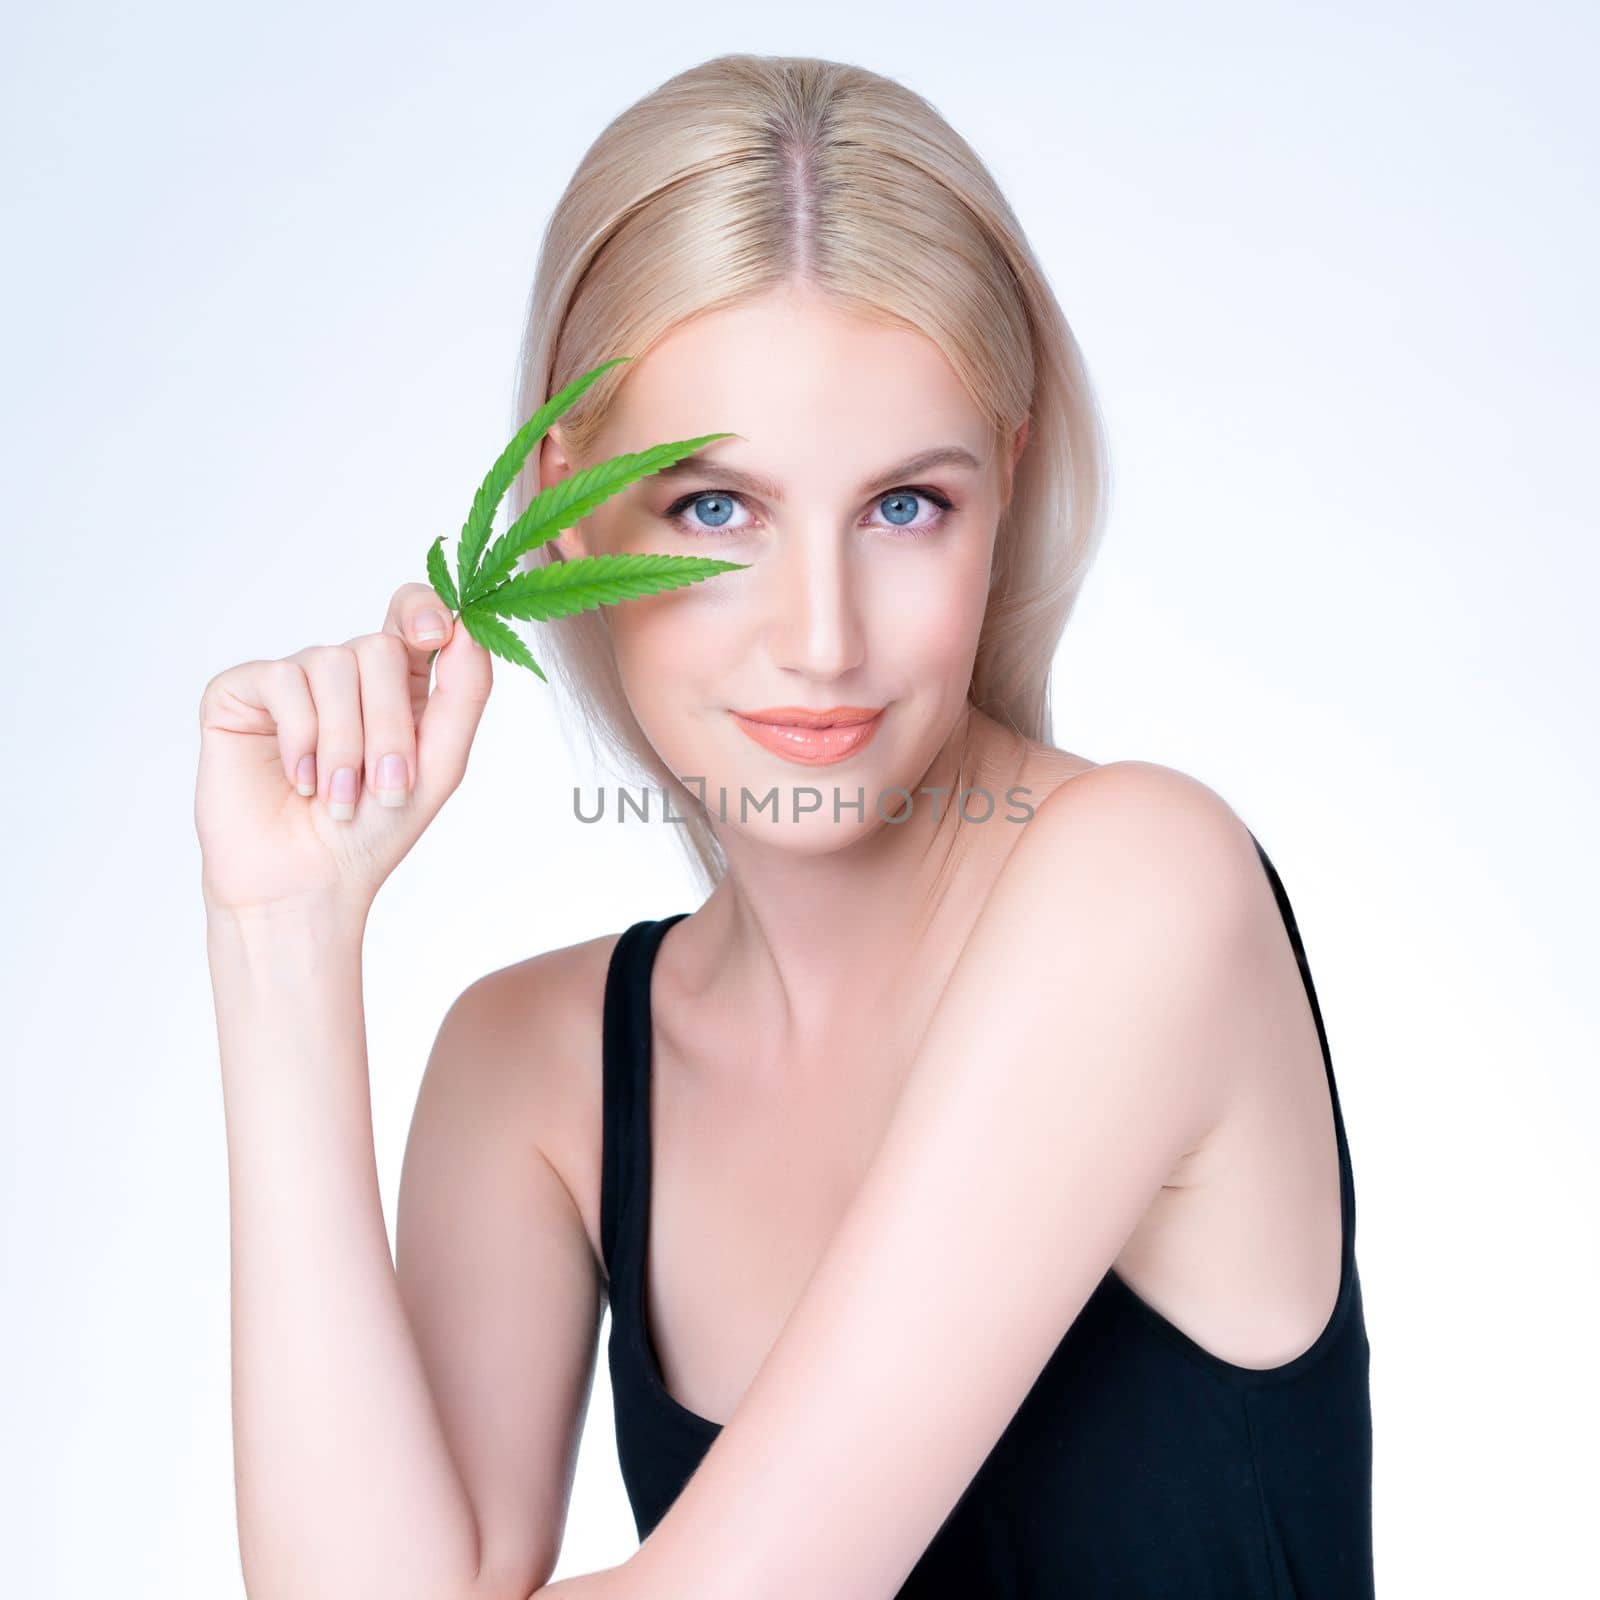 Personable white blond hair woman holding CBD leaf in isolated background. by biancoblue